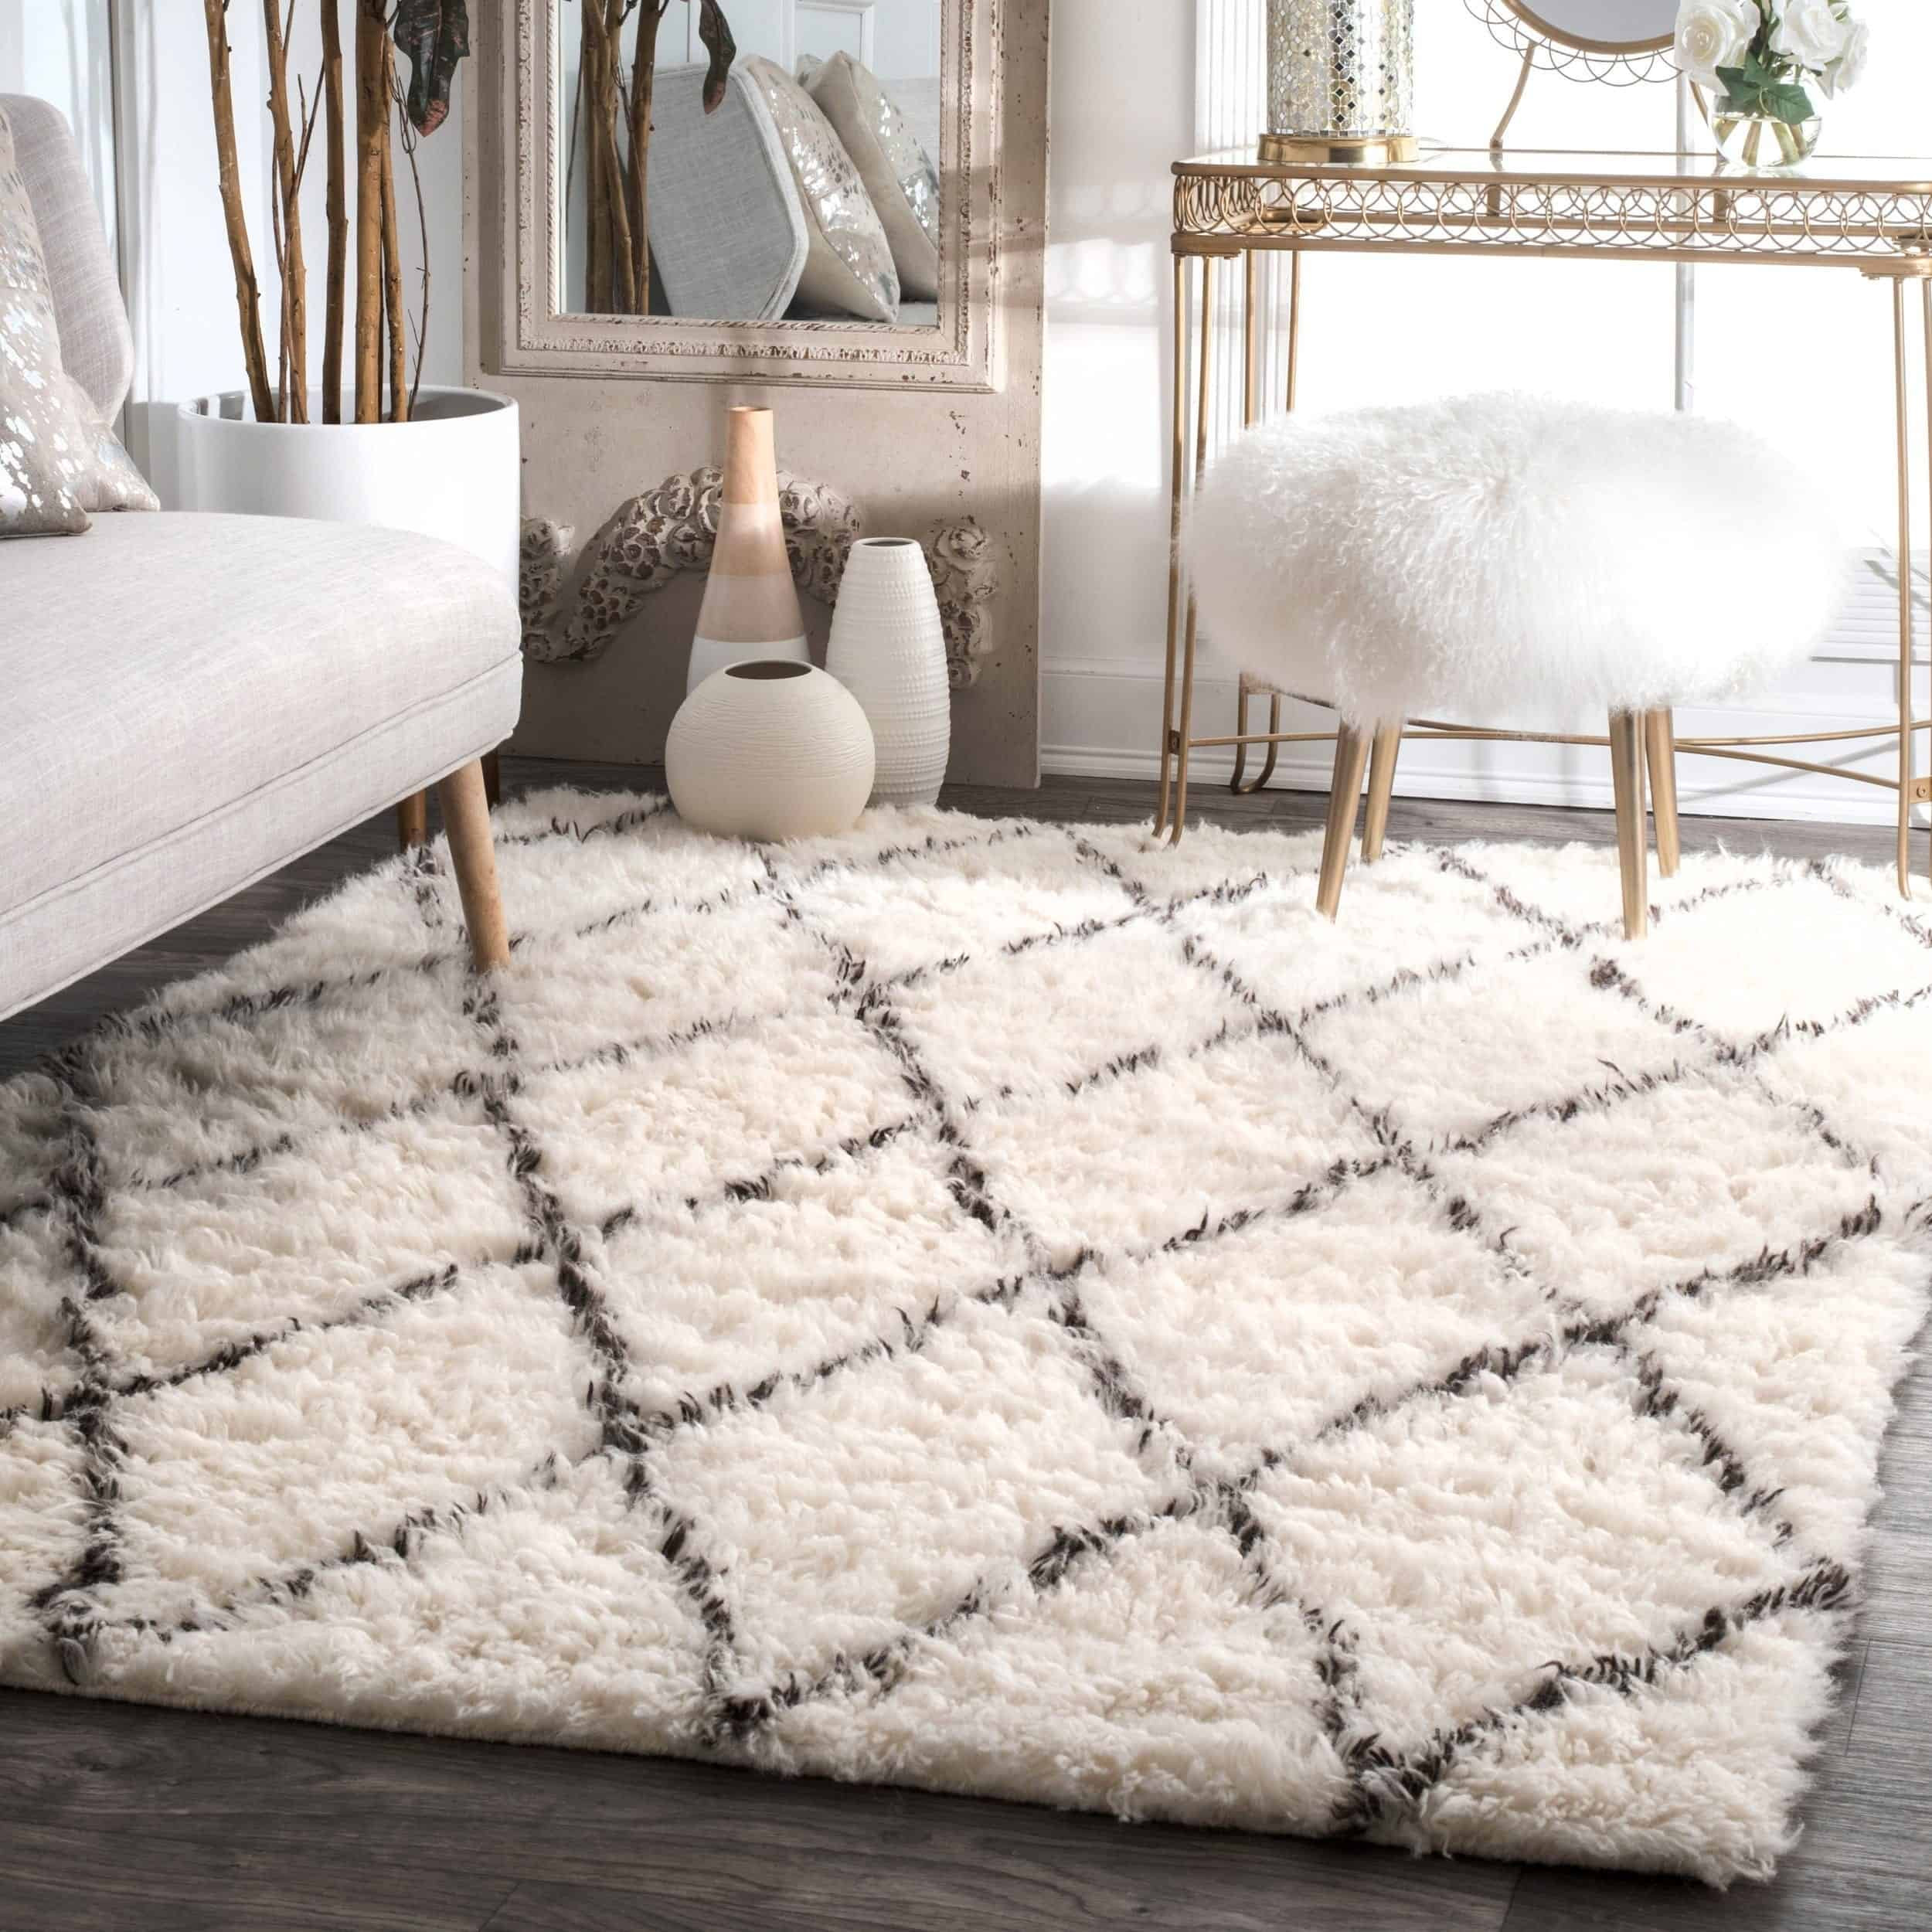 Shaggy Living Room Rugs
 Living Room Rugs That Chicly Transform Your Space